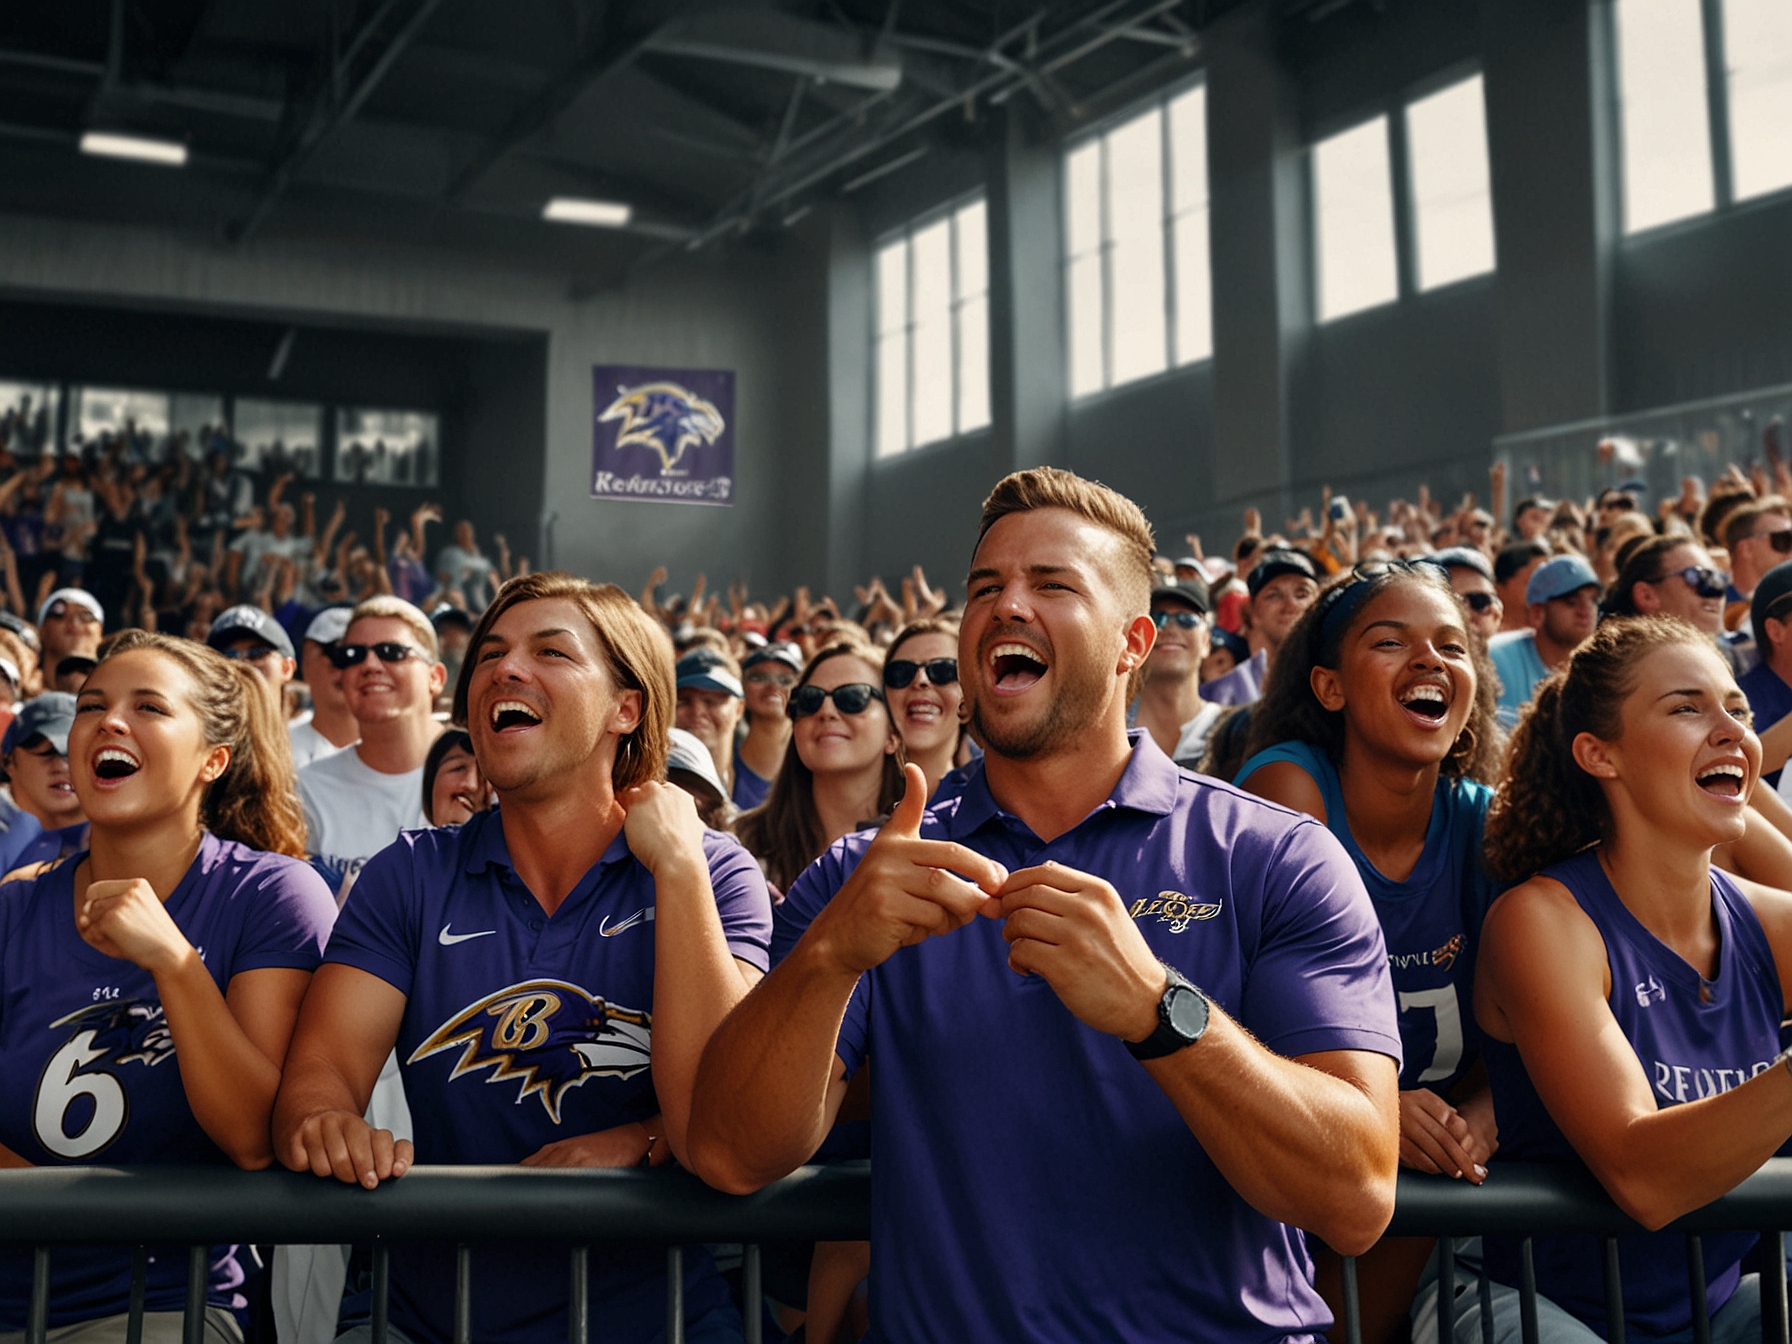 Fans cheer while watching the Baltimore Ravens during an open training camp practice at the Under Armour Performance Center, capturing the excitement and engagement of the community.